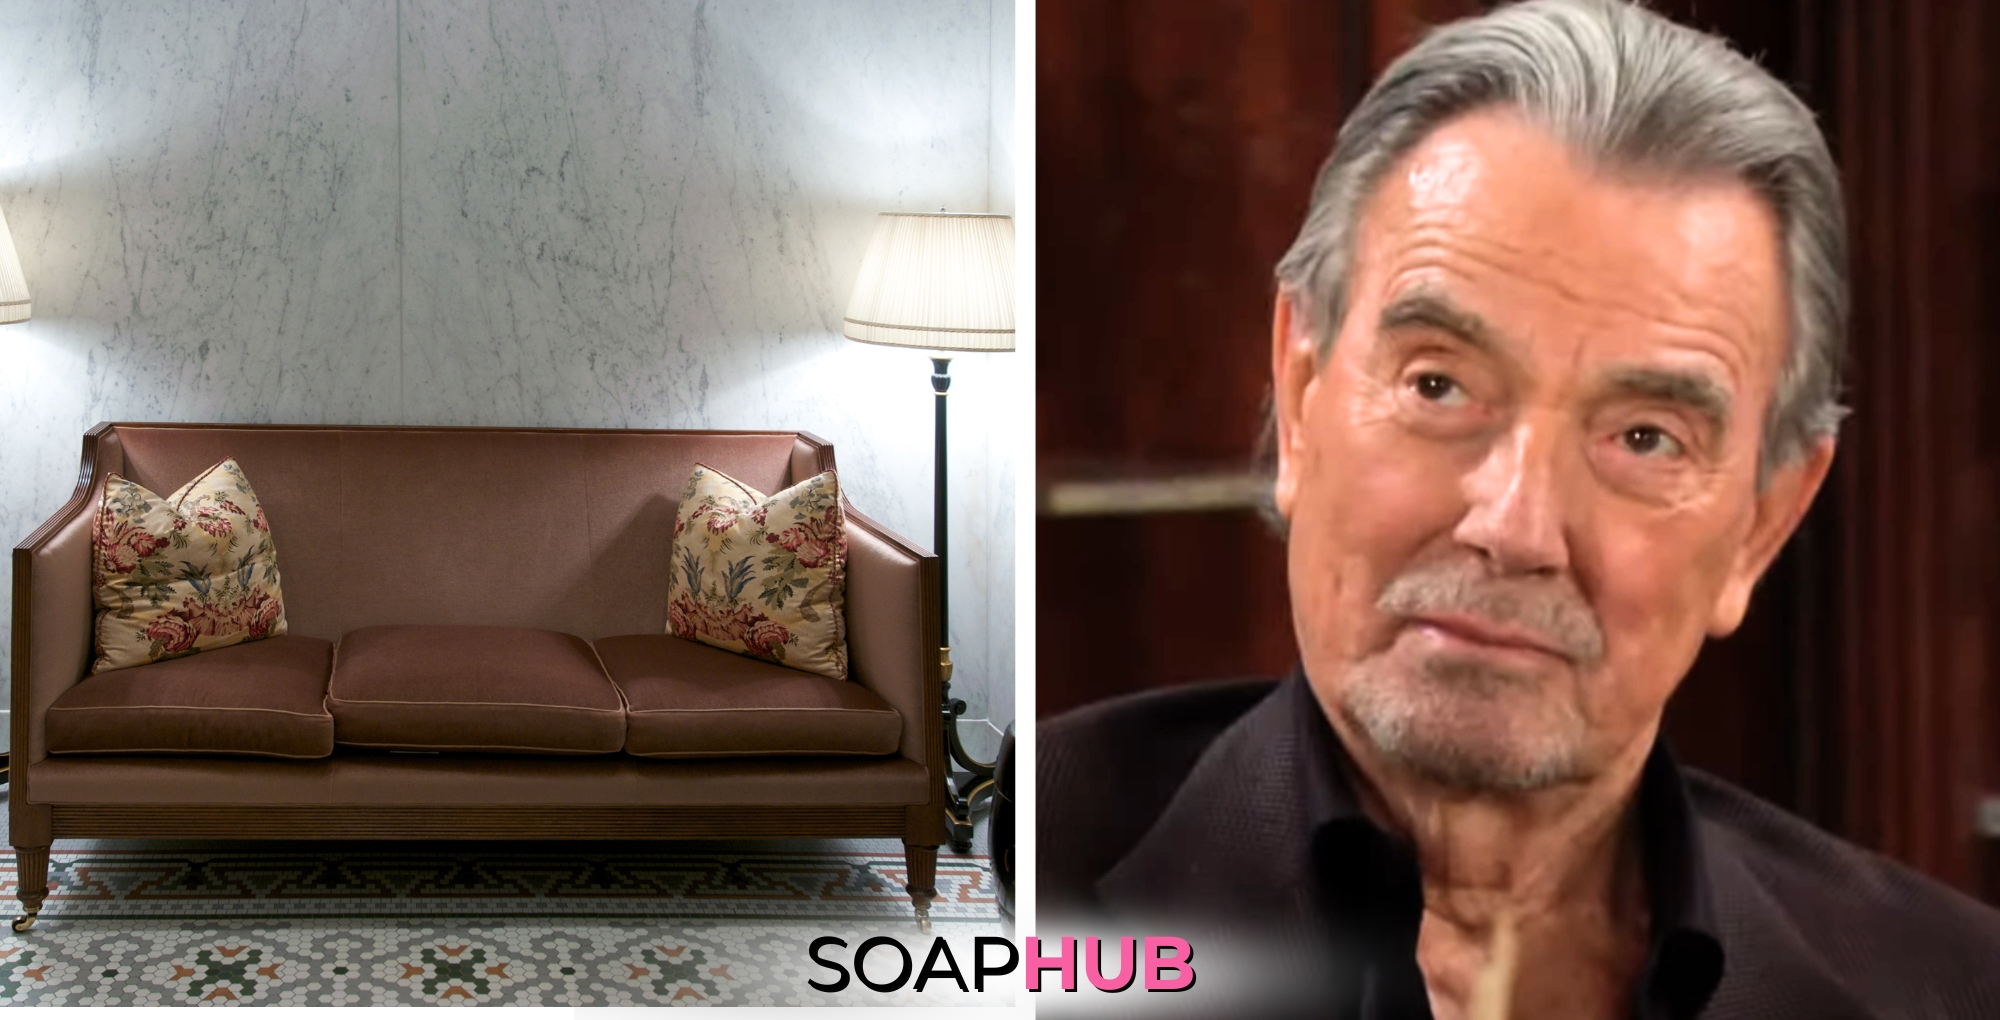 The Young and the Restless Eric Braeden, couch, and the Soap Hub logo.